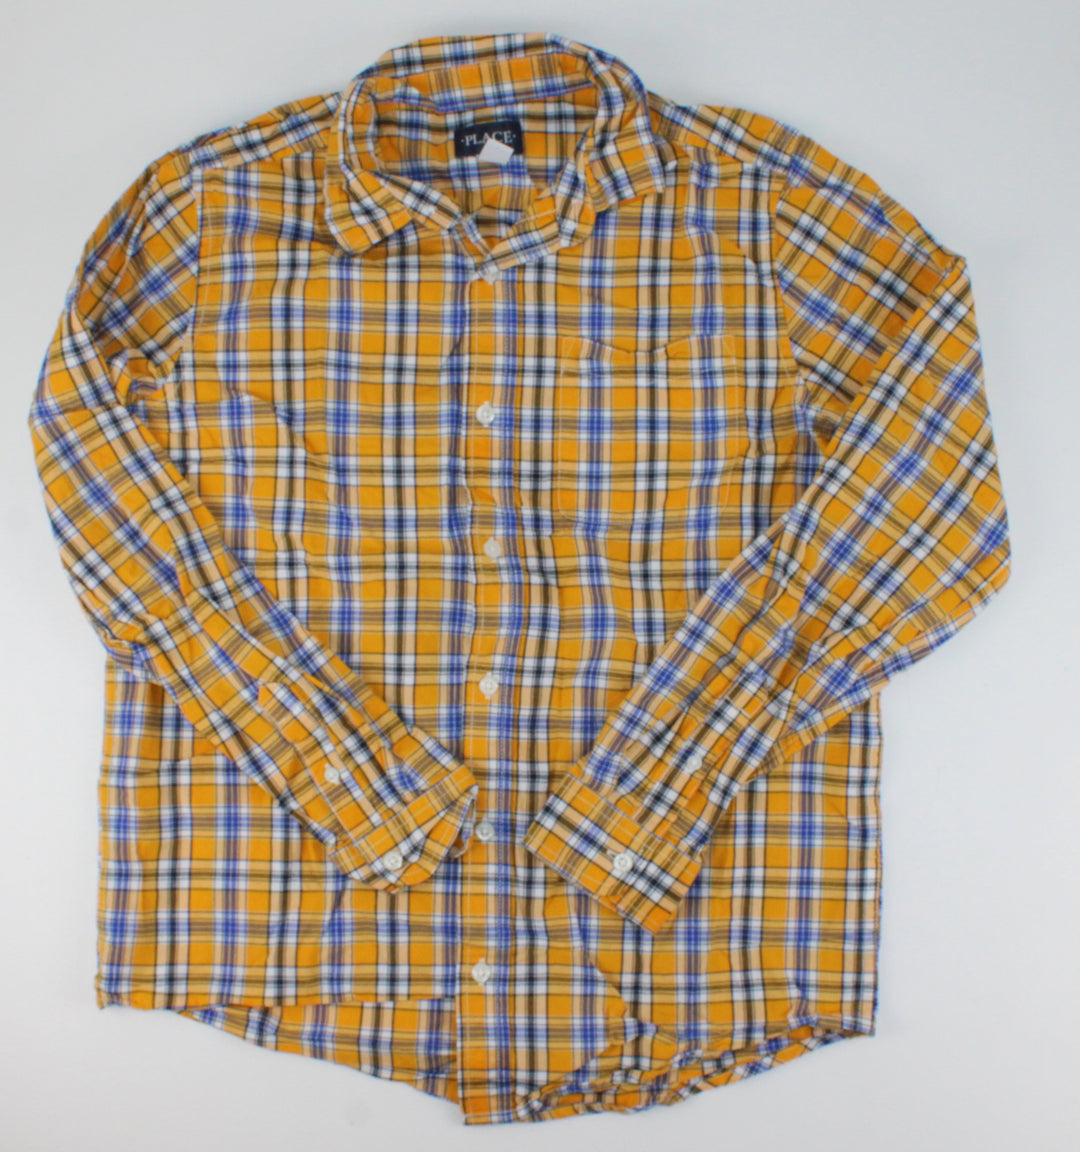 CHILDRENS PLACE YELLOW PLAID LONG SLEEVE TOP 16Y EUC